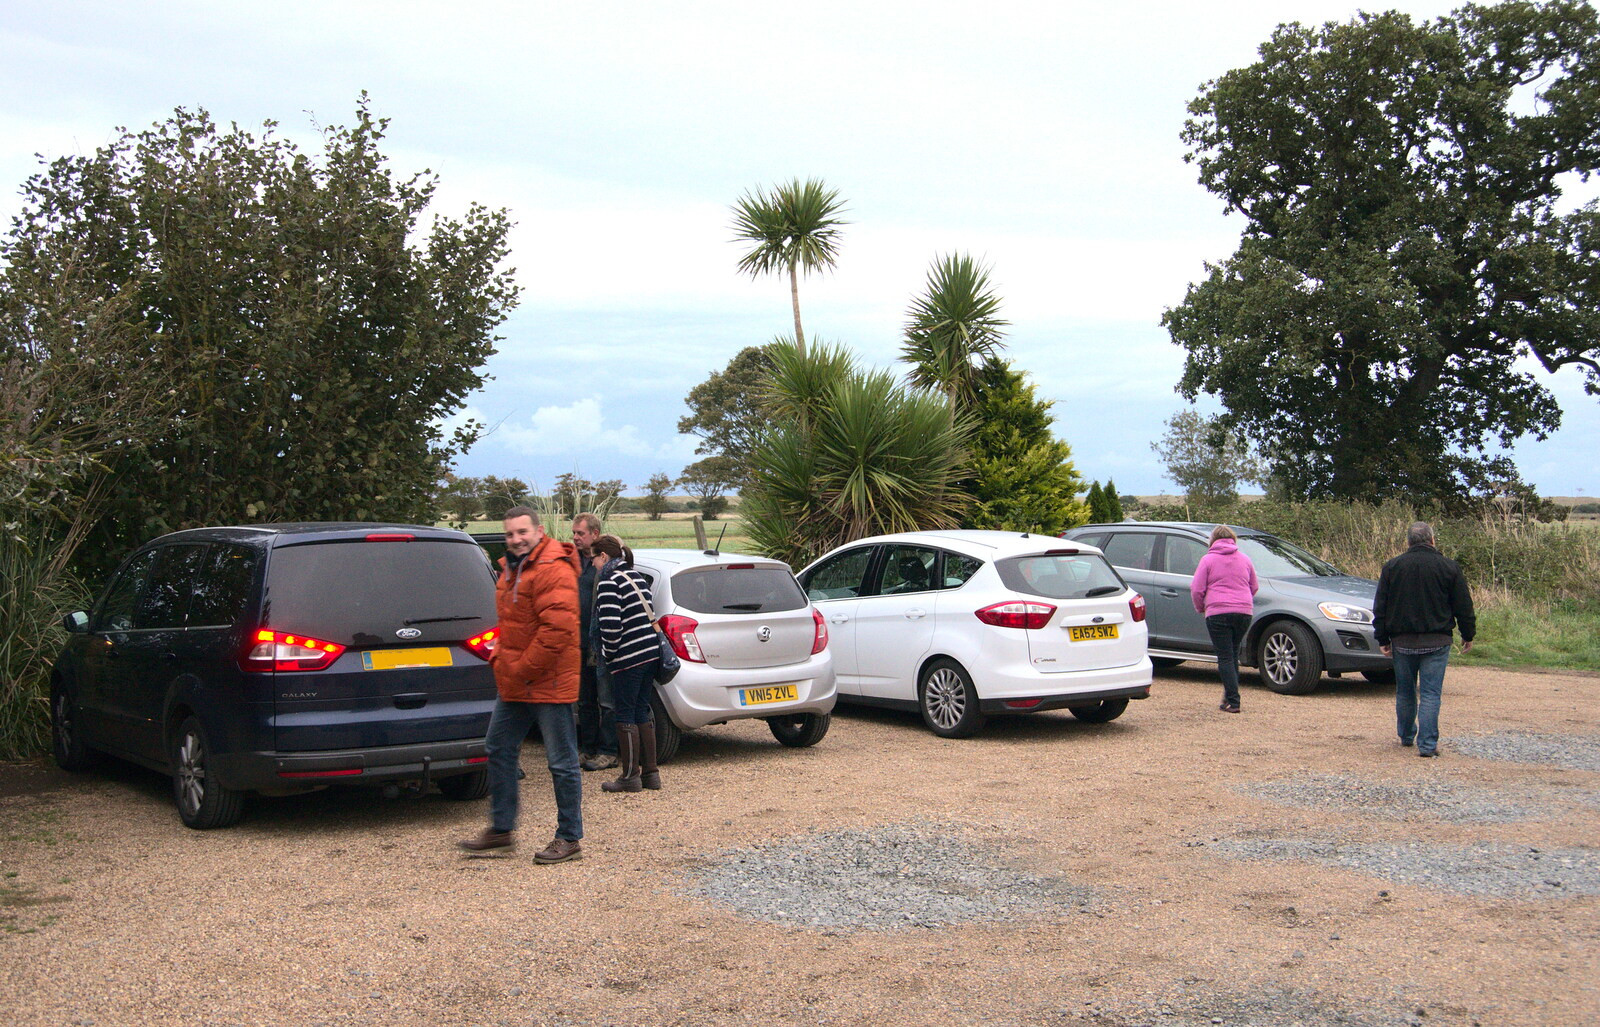 In the pub car park from An Optimistic Camping Weekend, Waxham Sands, Norfolk - 22nd September 2018